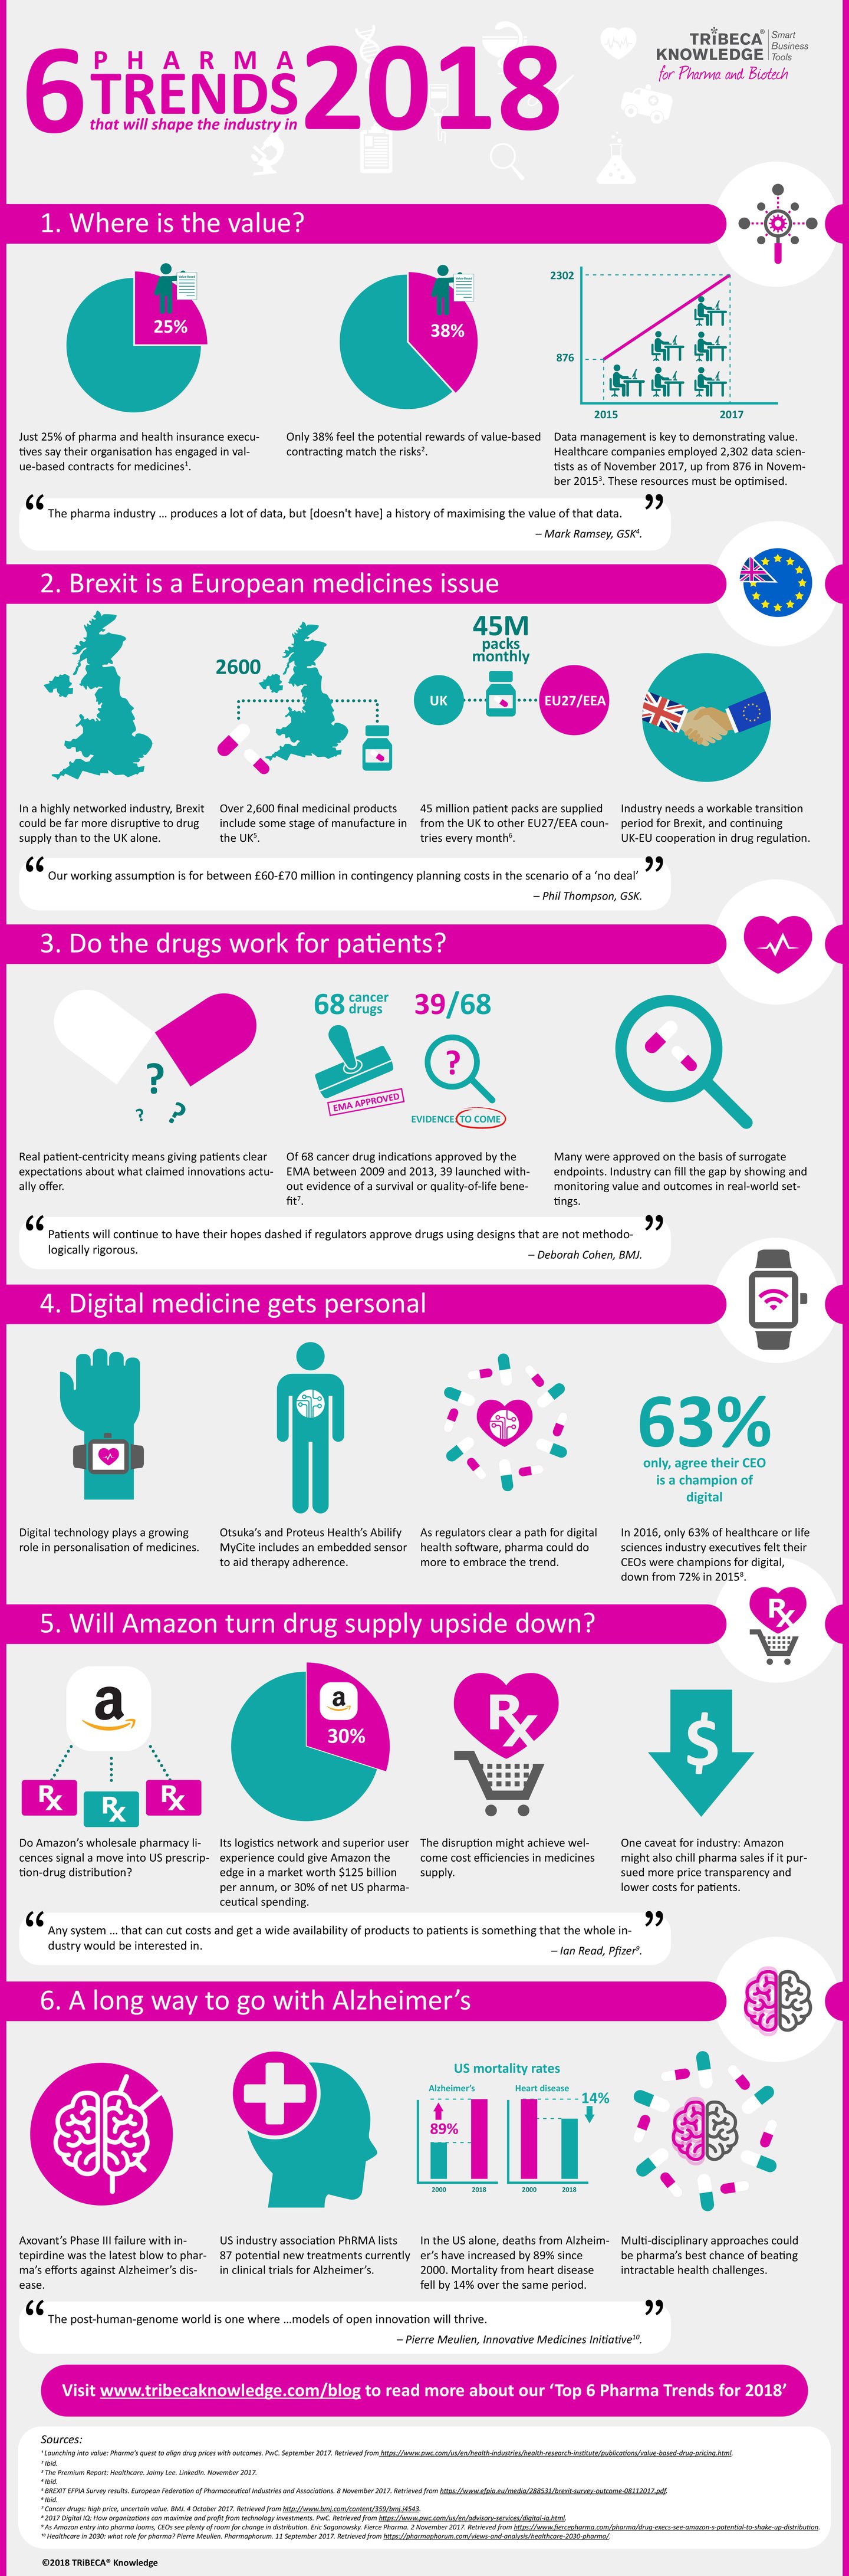 6 pharma trends for 2018 infographic from tribeca knowledge